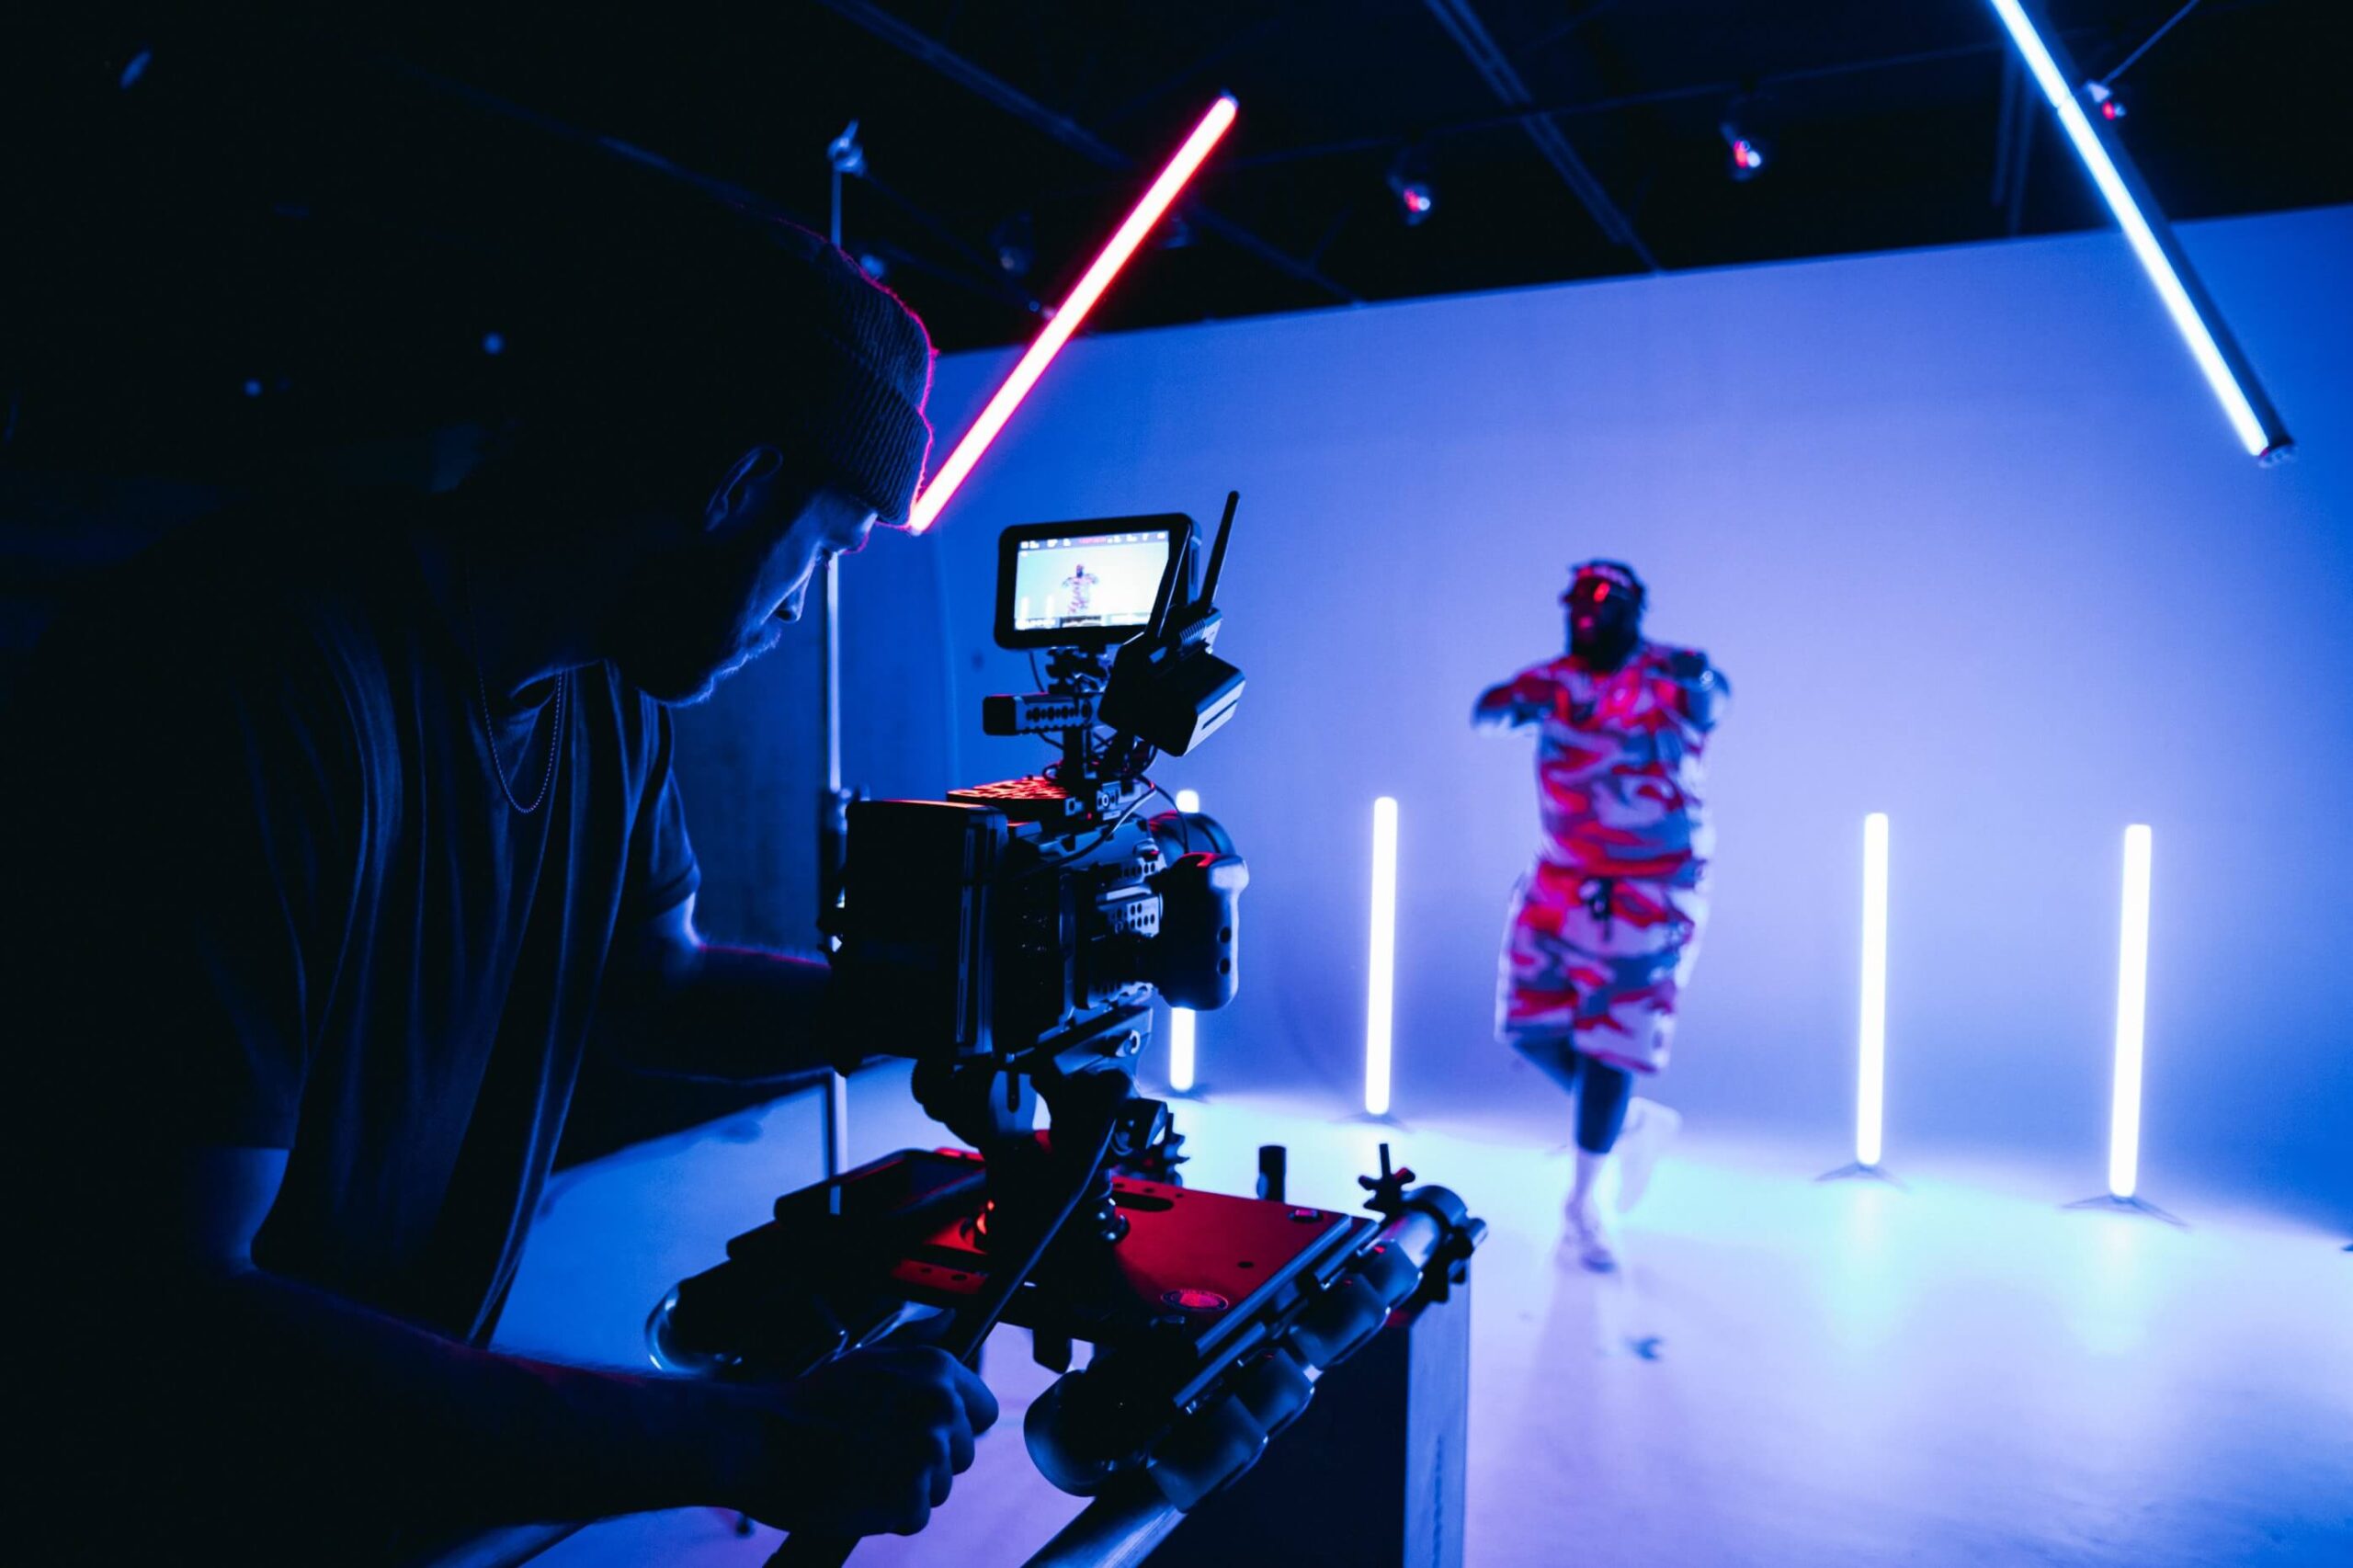 Video-shoot in a dark room with neon lights